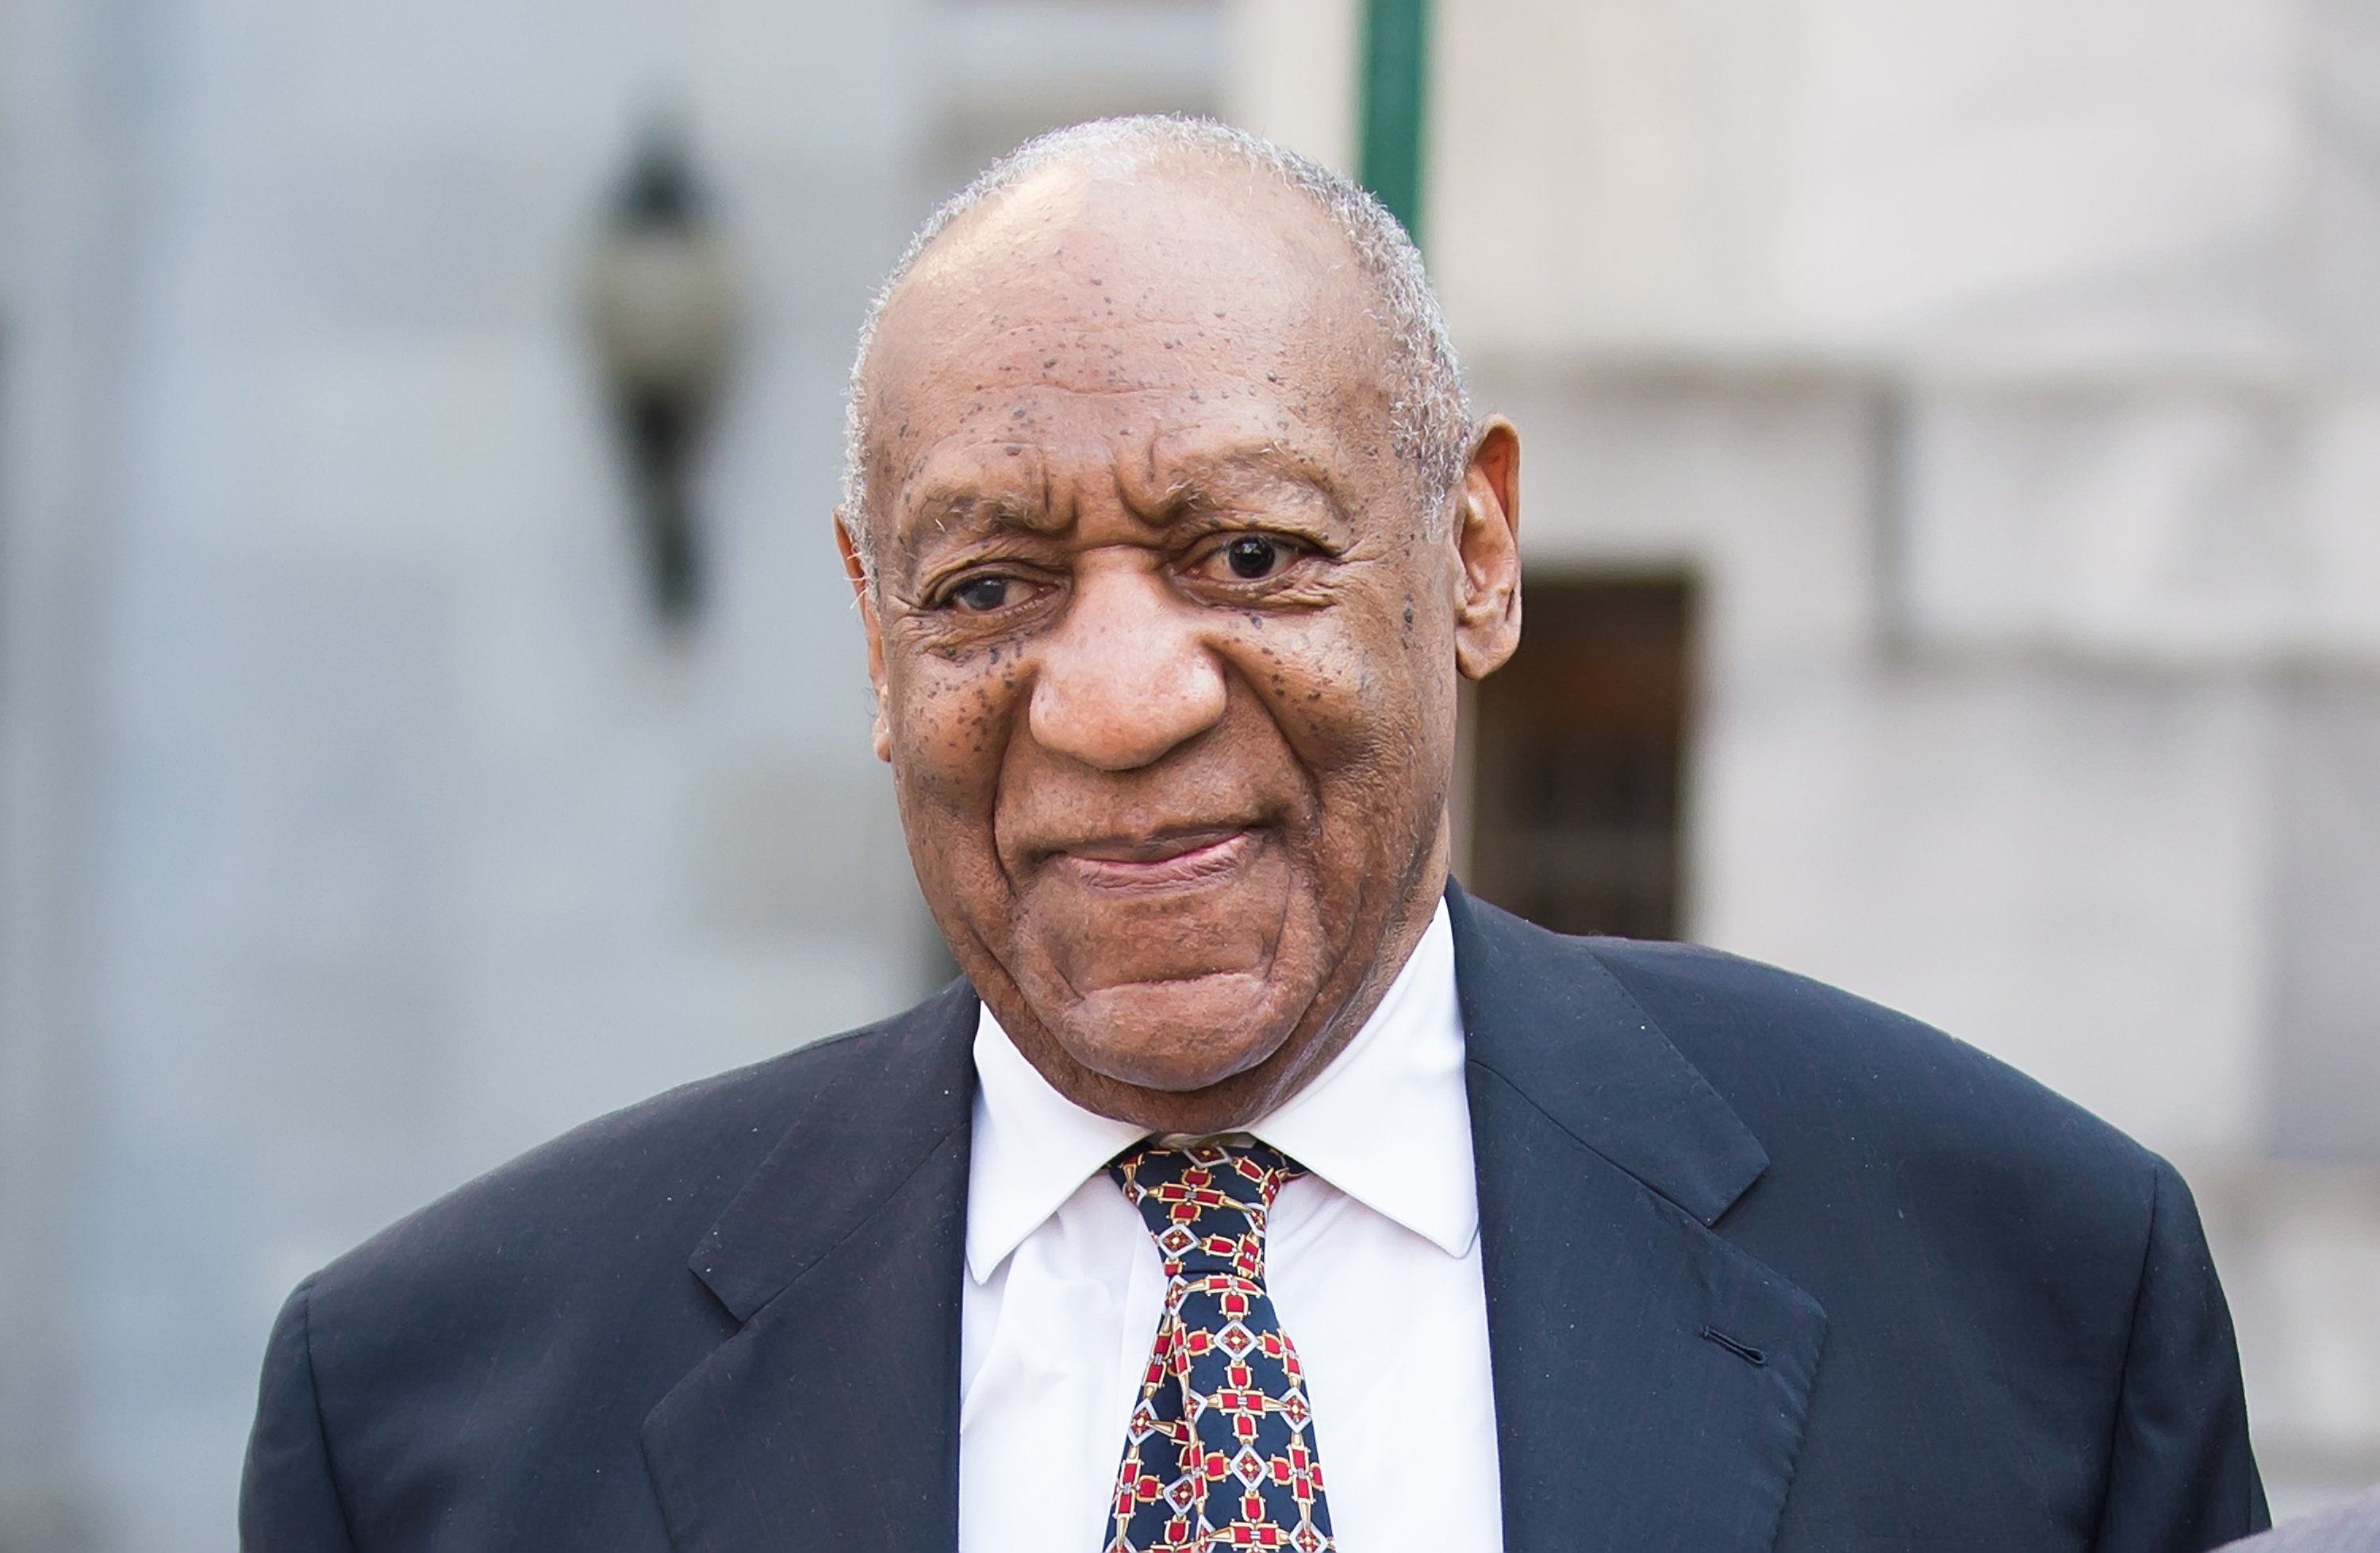 Bill Cosby at the Montgomery County Courthouse for the fifth day of his retrial for sexual assault charges on April 13, 2018. | Photo: Getty Images